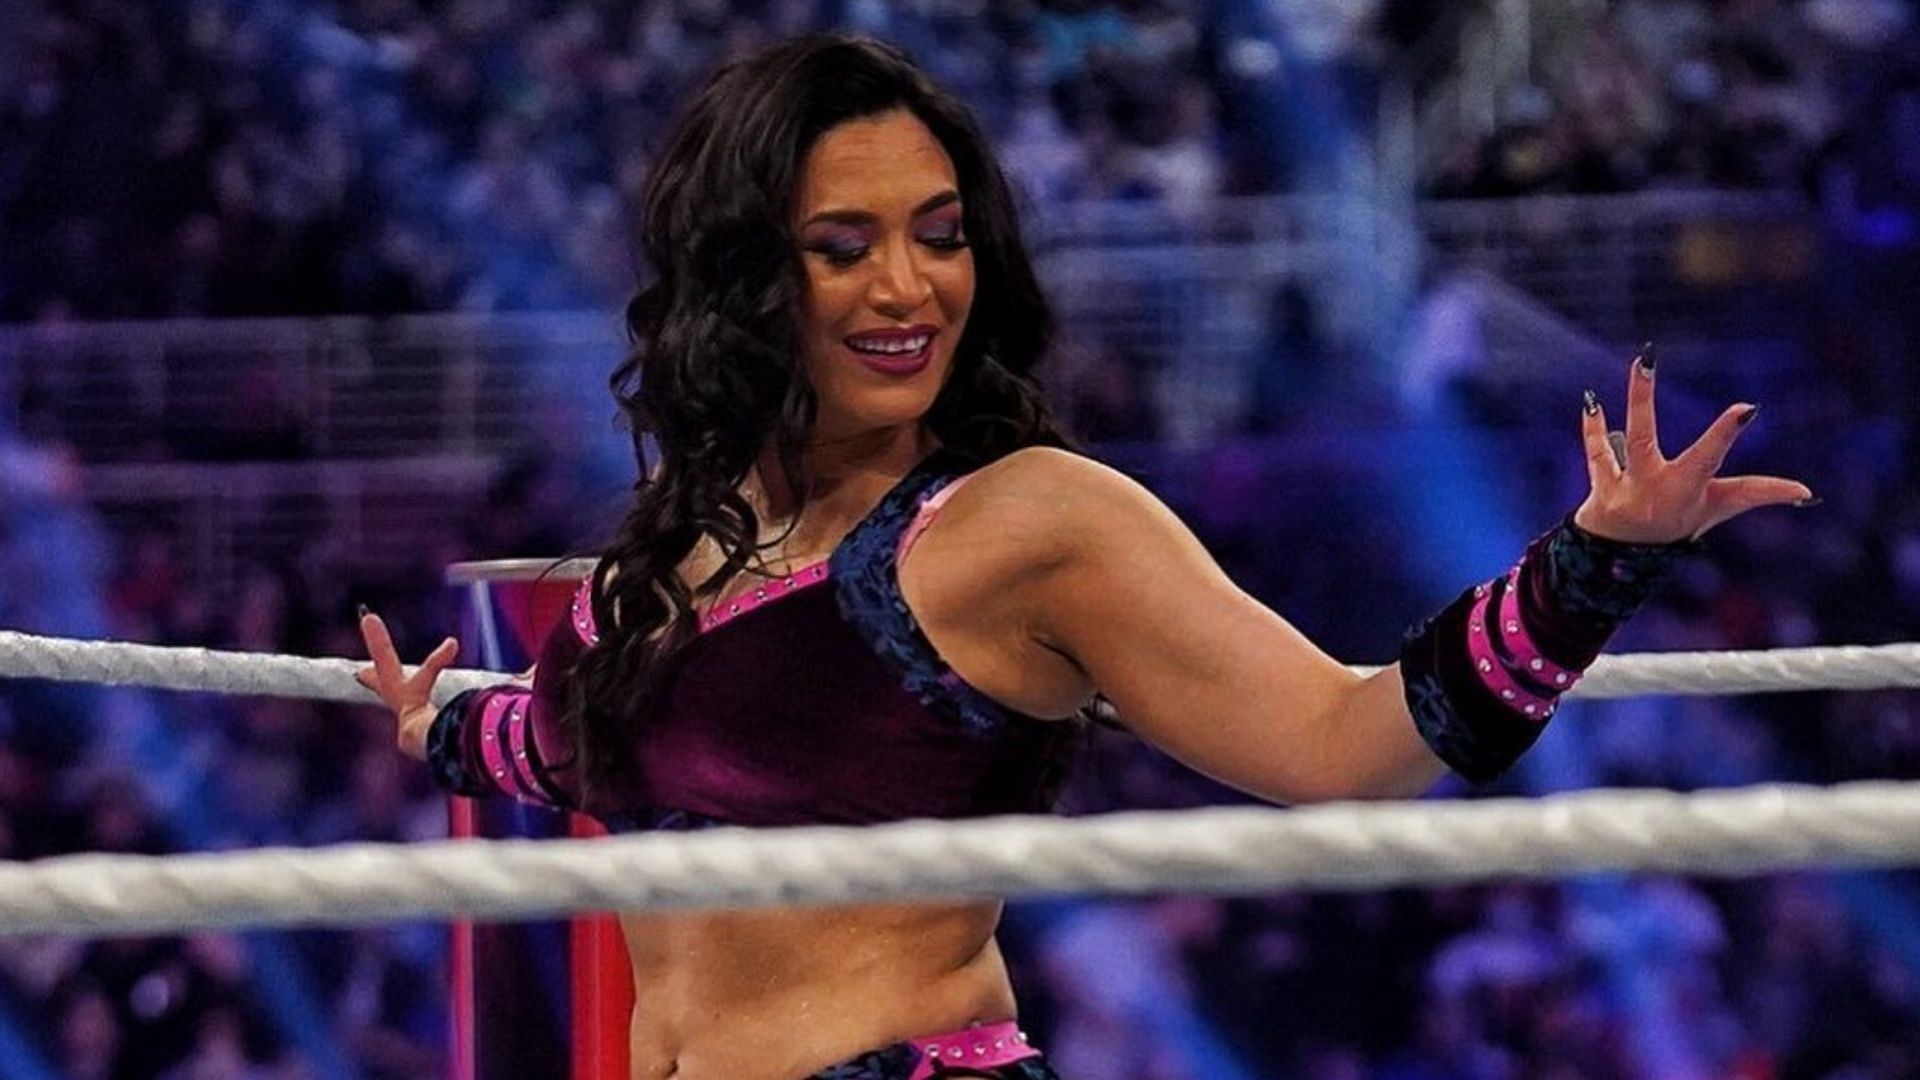 Melina is a former two-time WWE Women